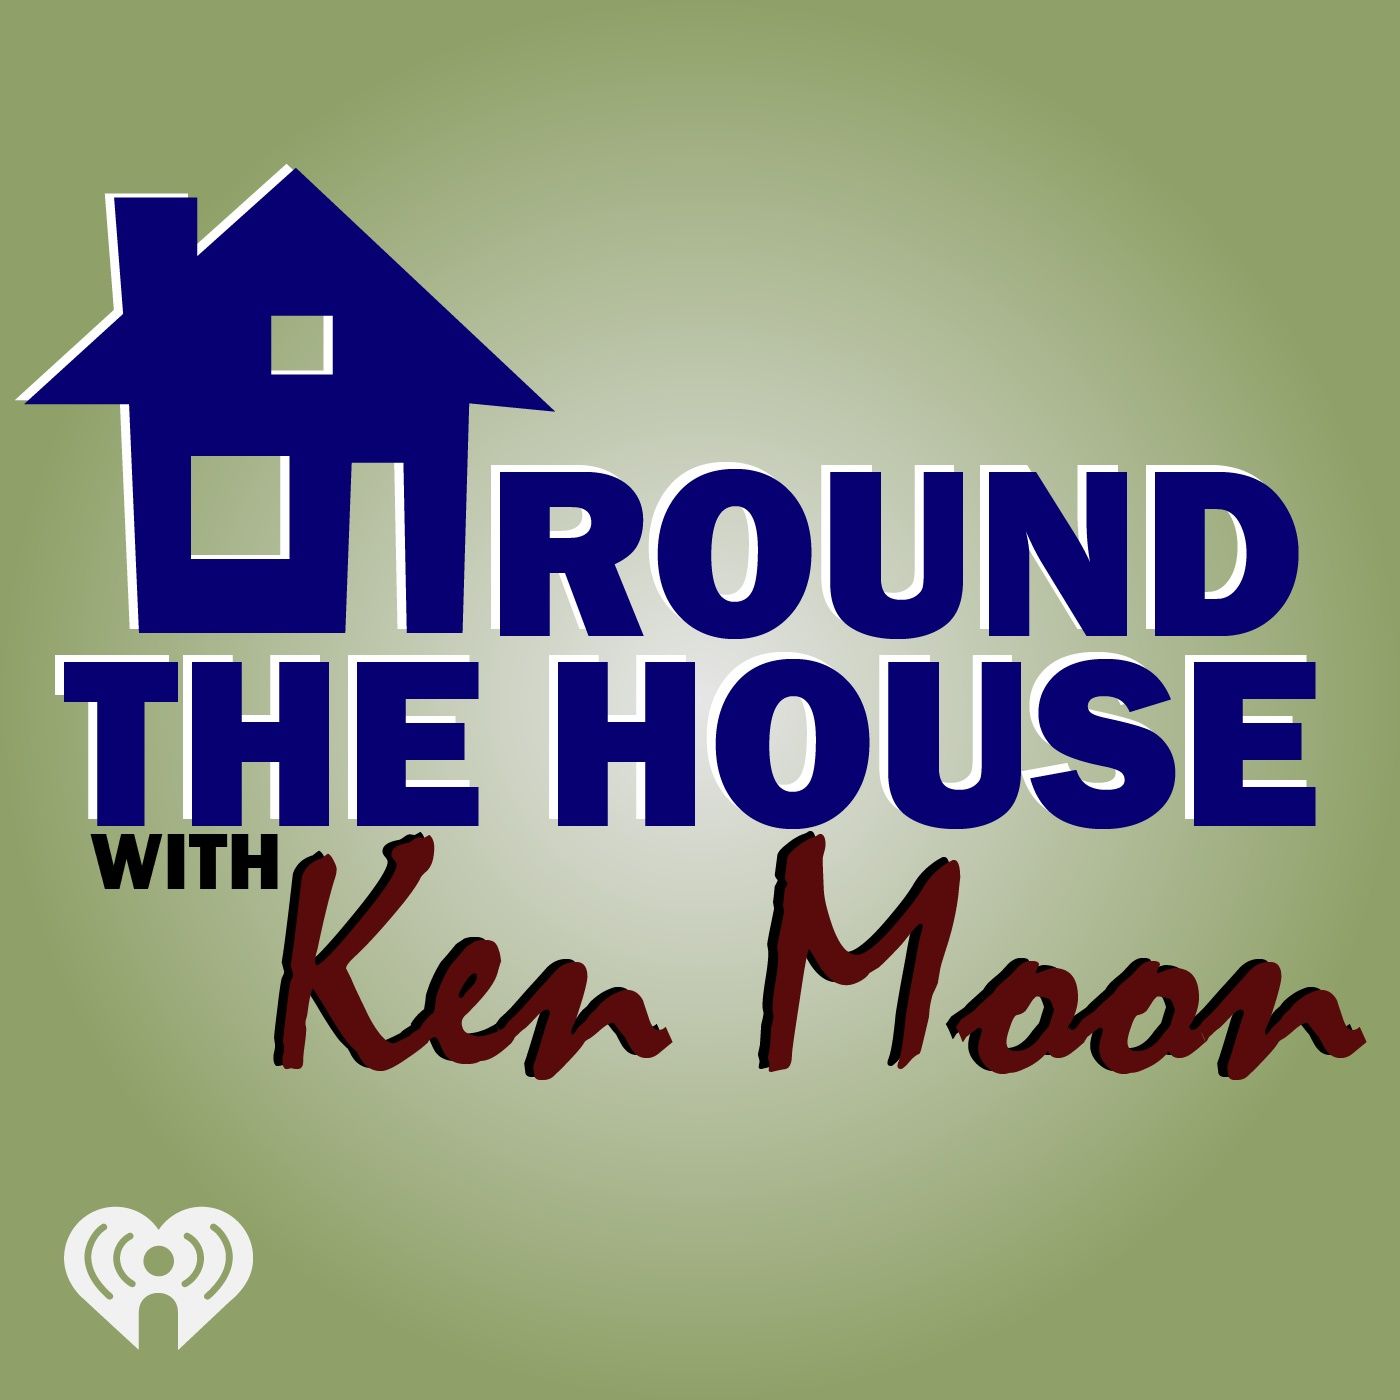 Around the House with Ken Moon